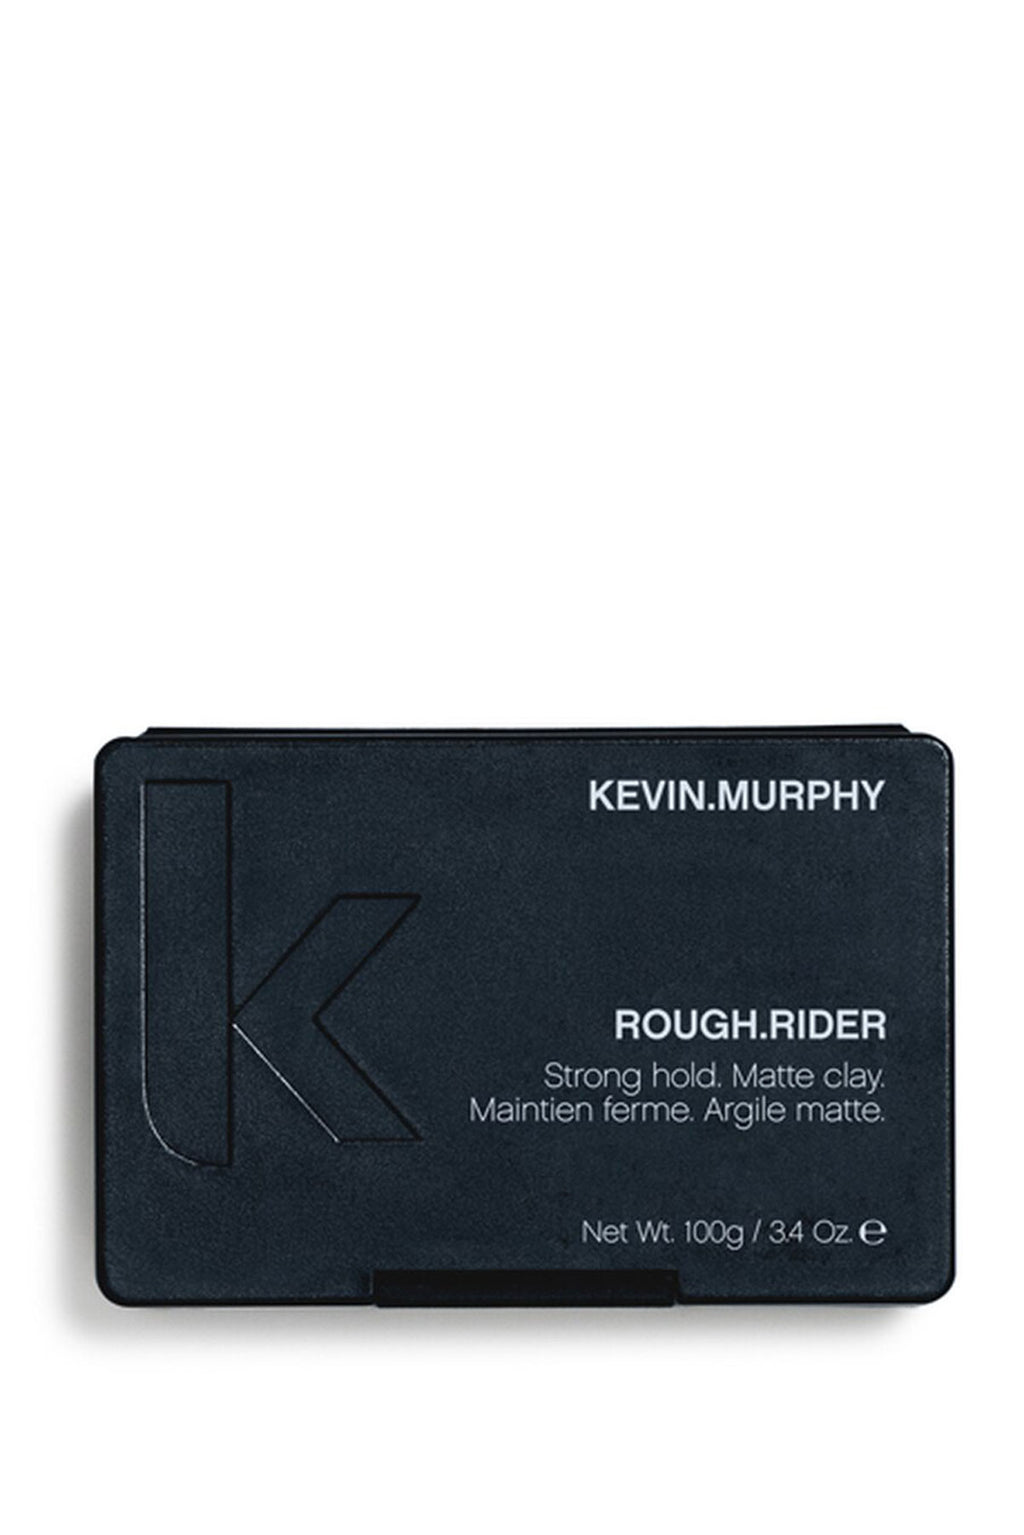 Kevin Murphy Rough Rider strong hold matte clay 100g